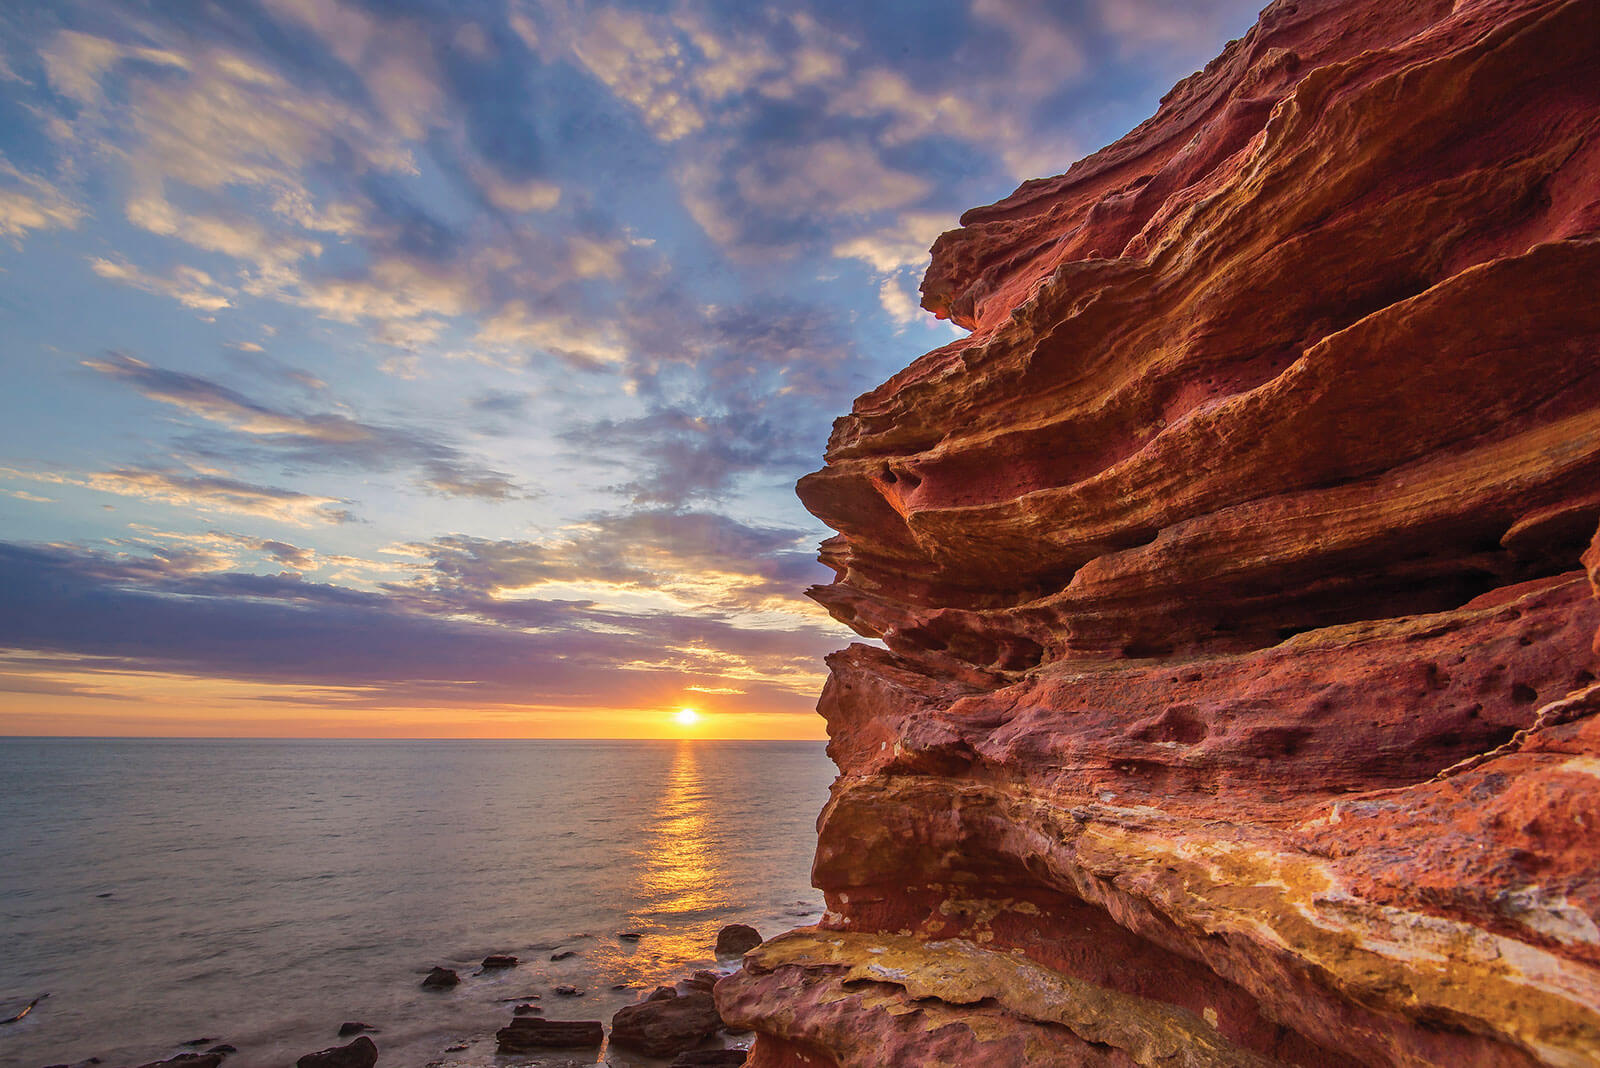 Sunset at Gantheaume Point, Broome